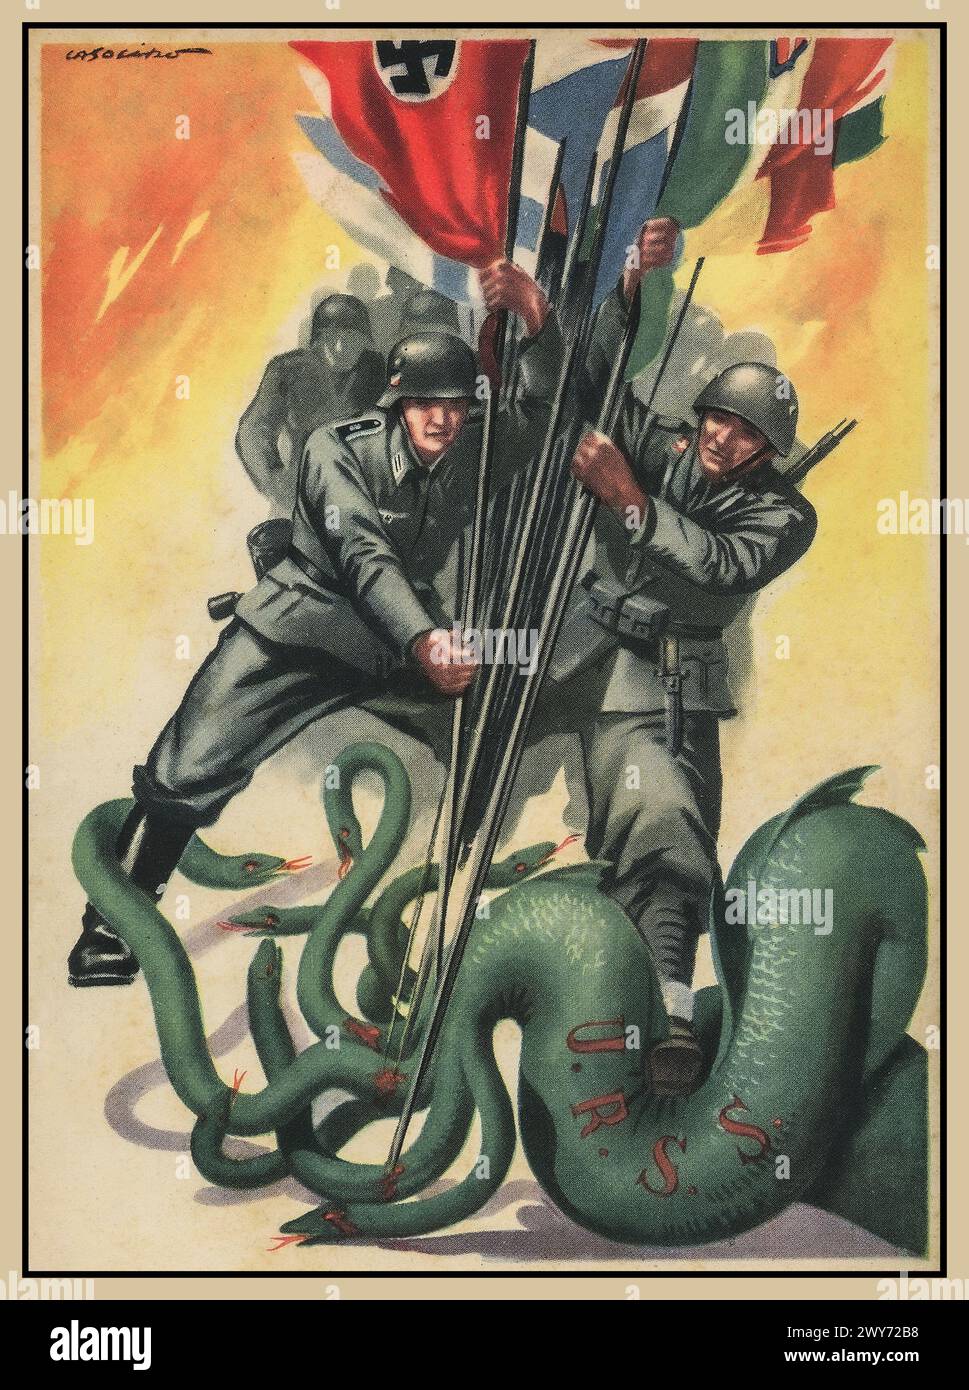 WW2 Nazi /Axis propaganda poster with Wehrmacht Nazi Germany and soldiers of The Axis, fighting a USSR green serpent, holding various banner flags of Axis countries including The Swastika.. World War II Second World War 1940s Stock Photo